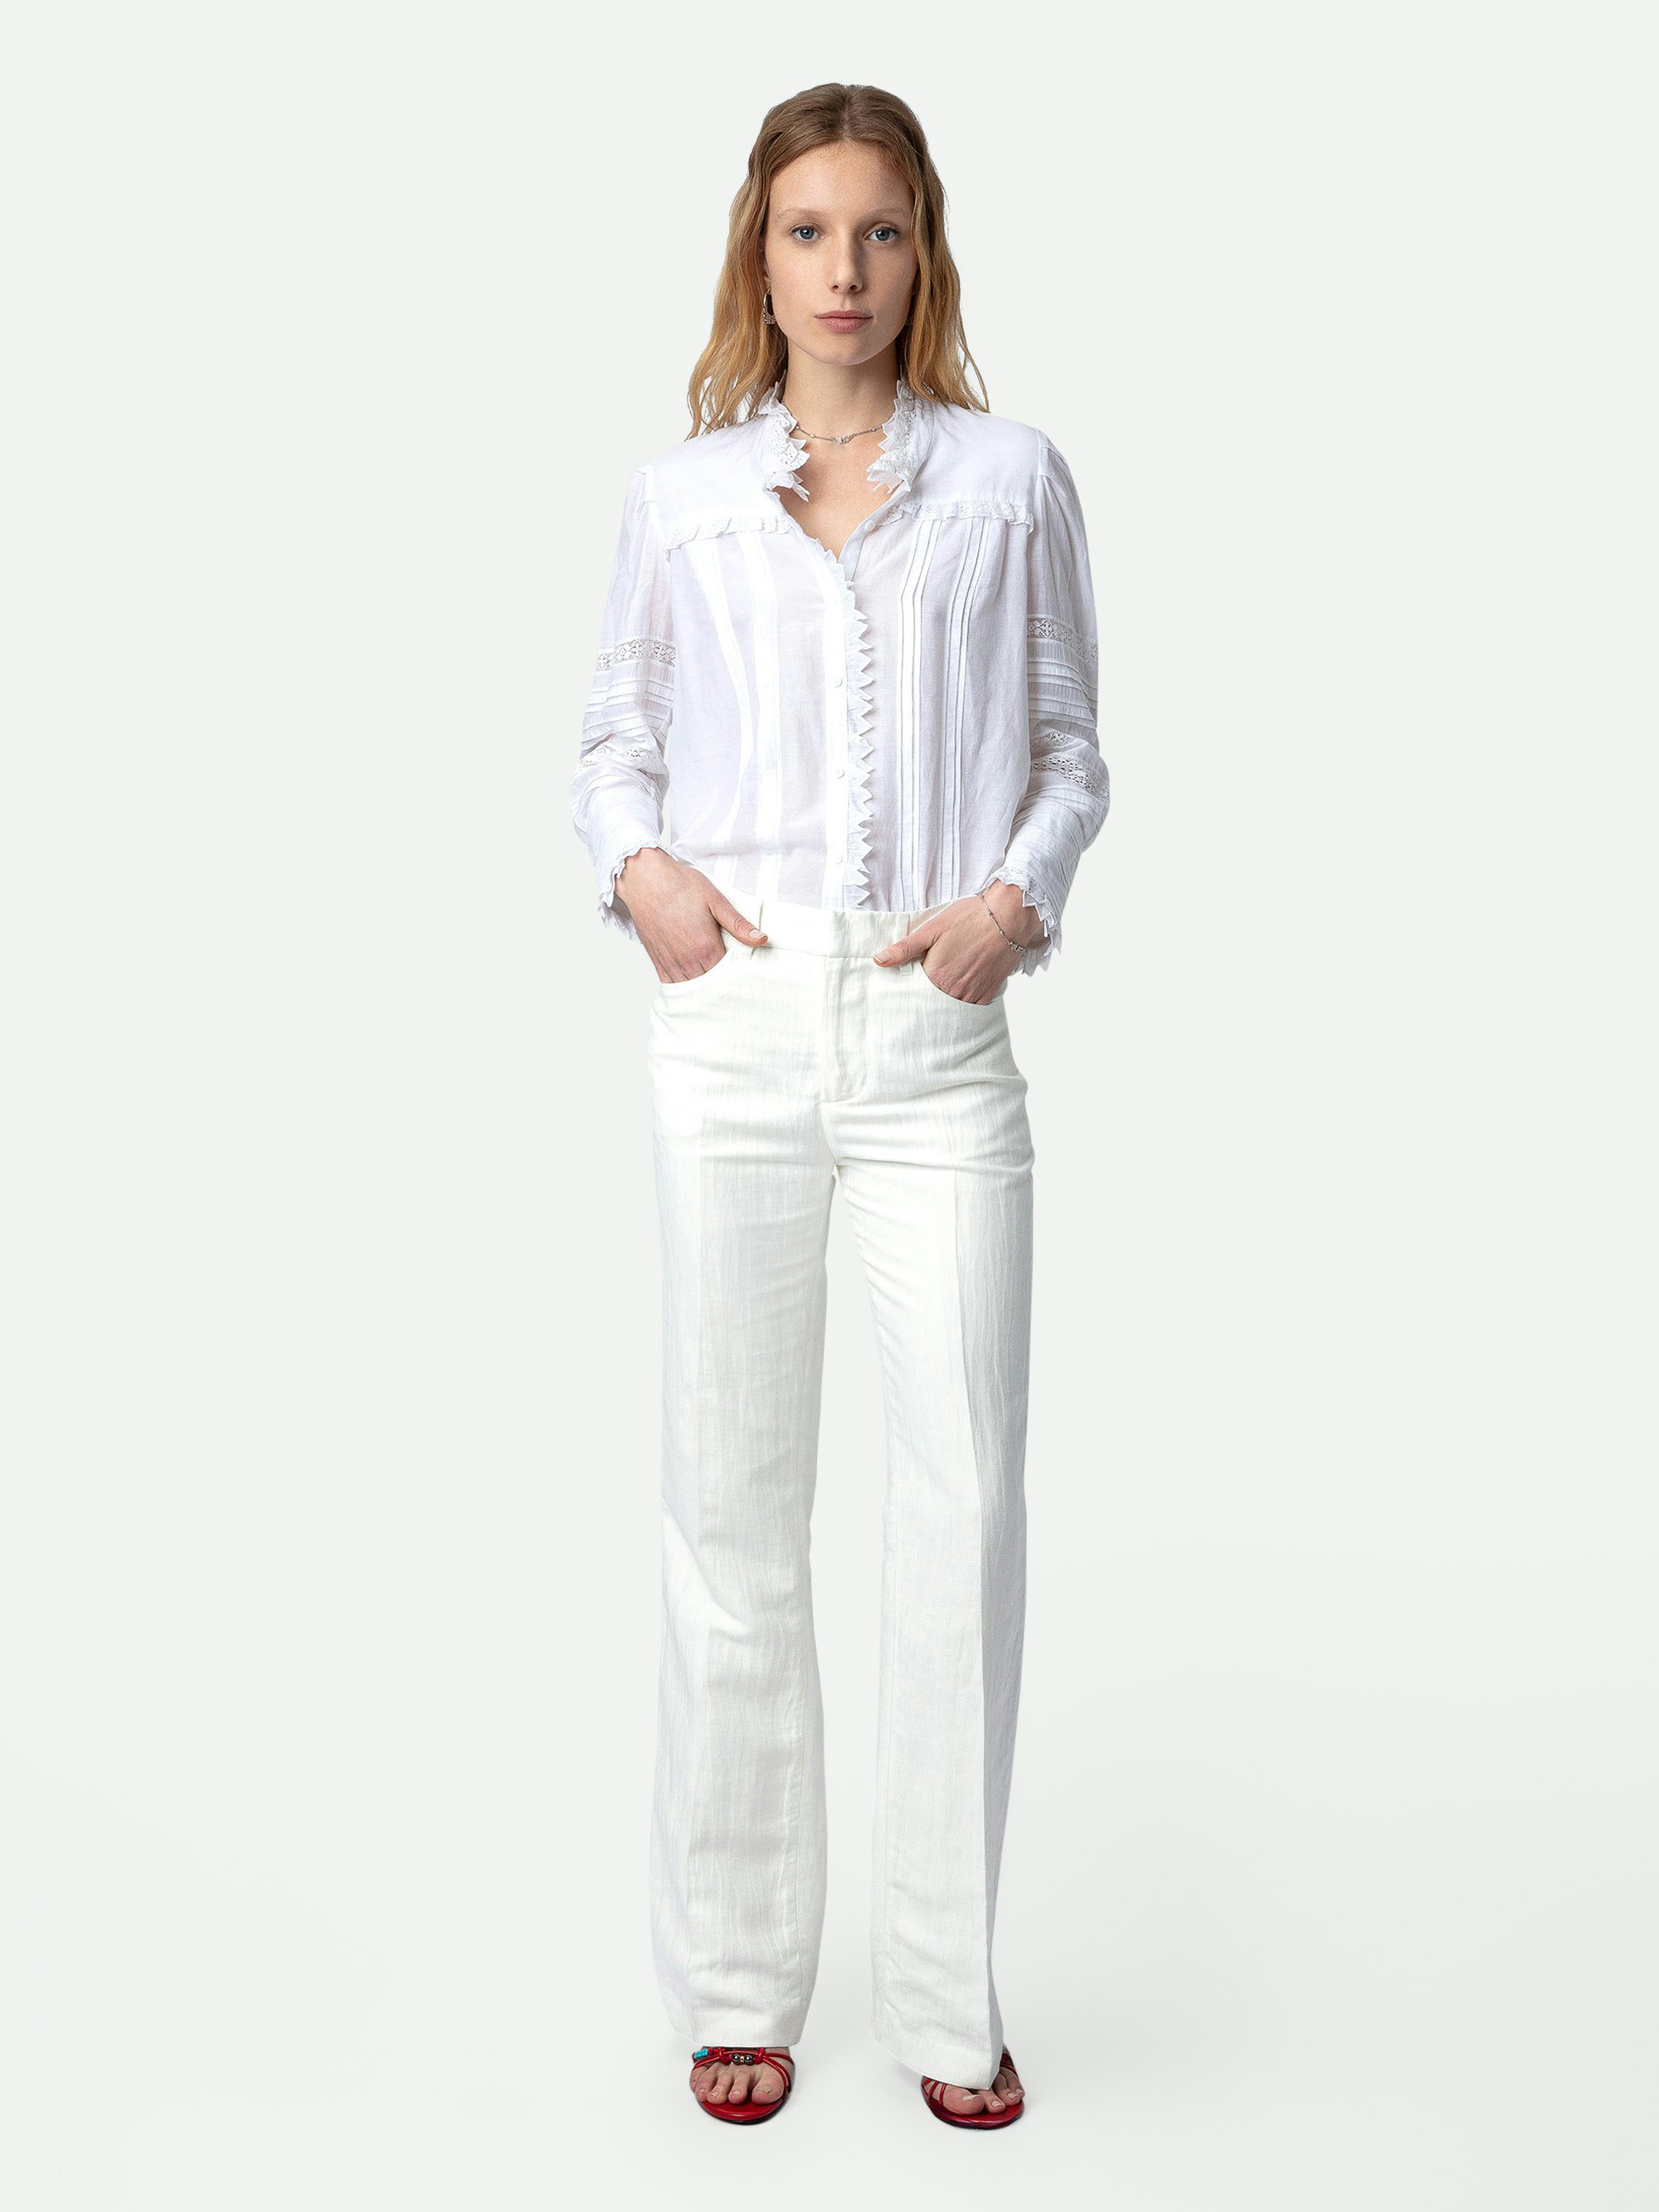 Pistol Pants - White linen flared tailored pants with pockets and pleats.